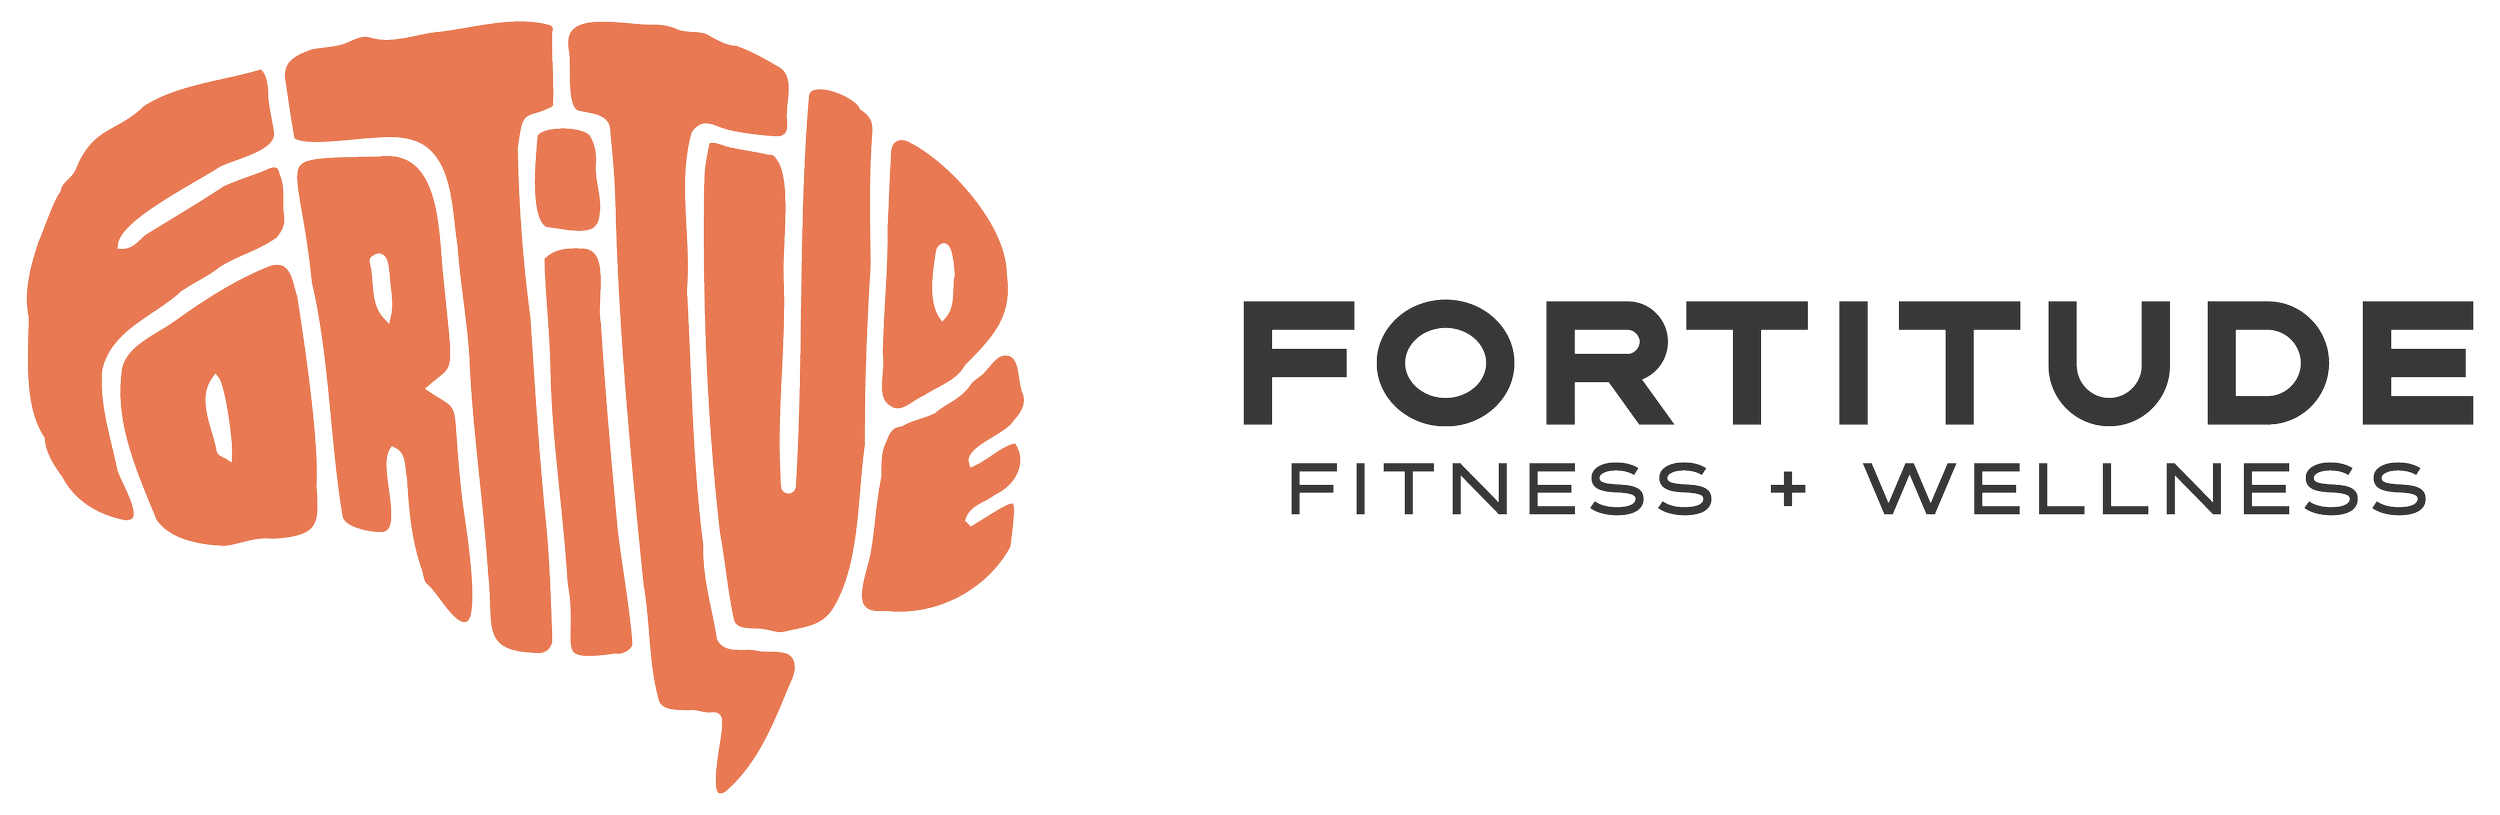 Fortitude Fitness + Wellness - Fitness Classes in Lindsay, ON